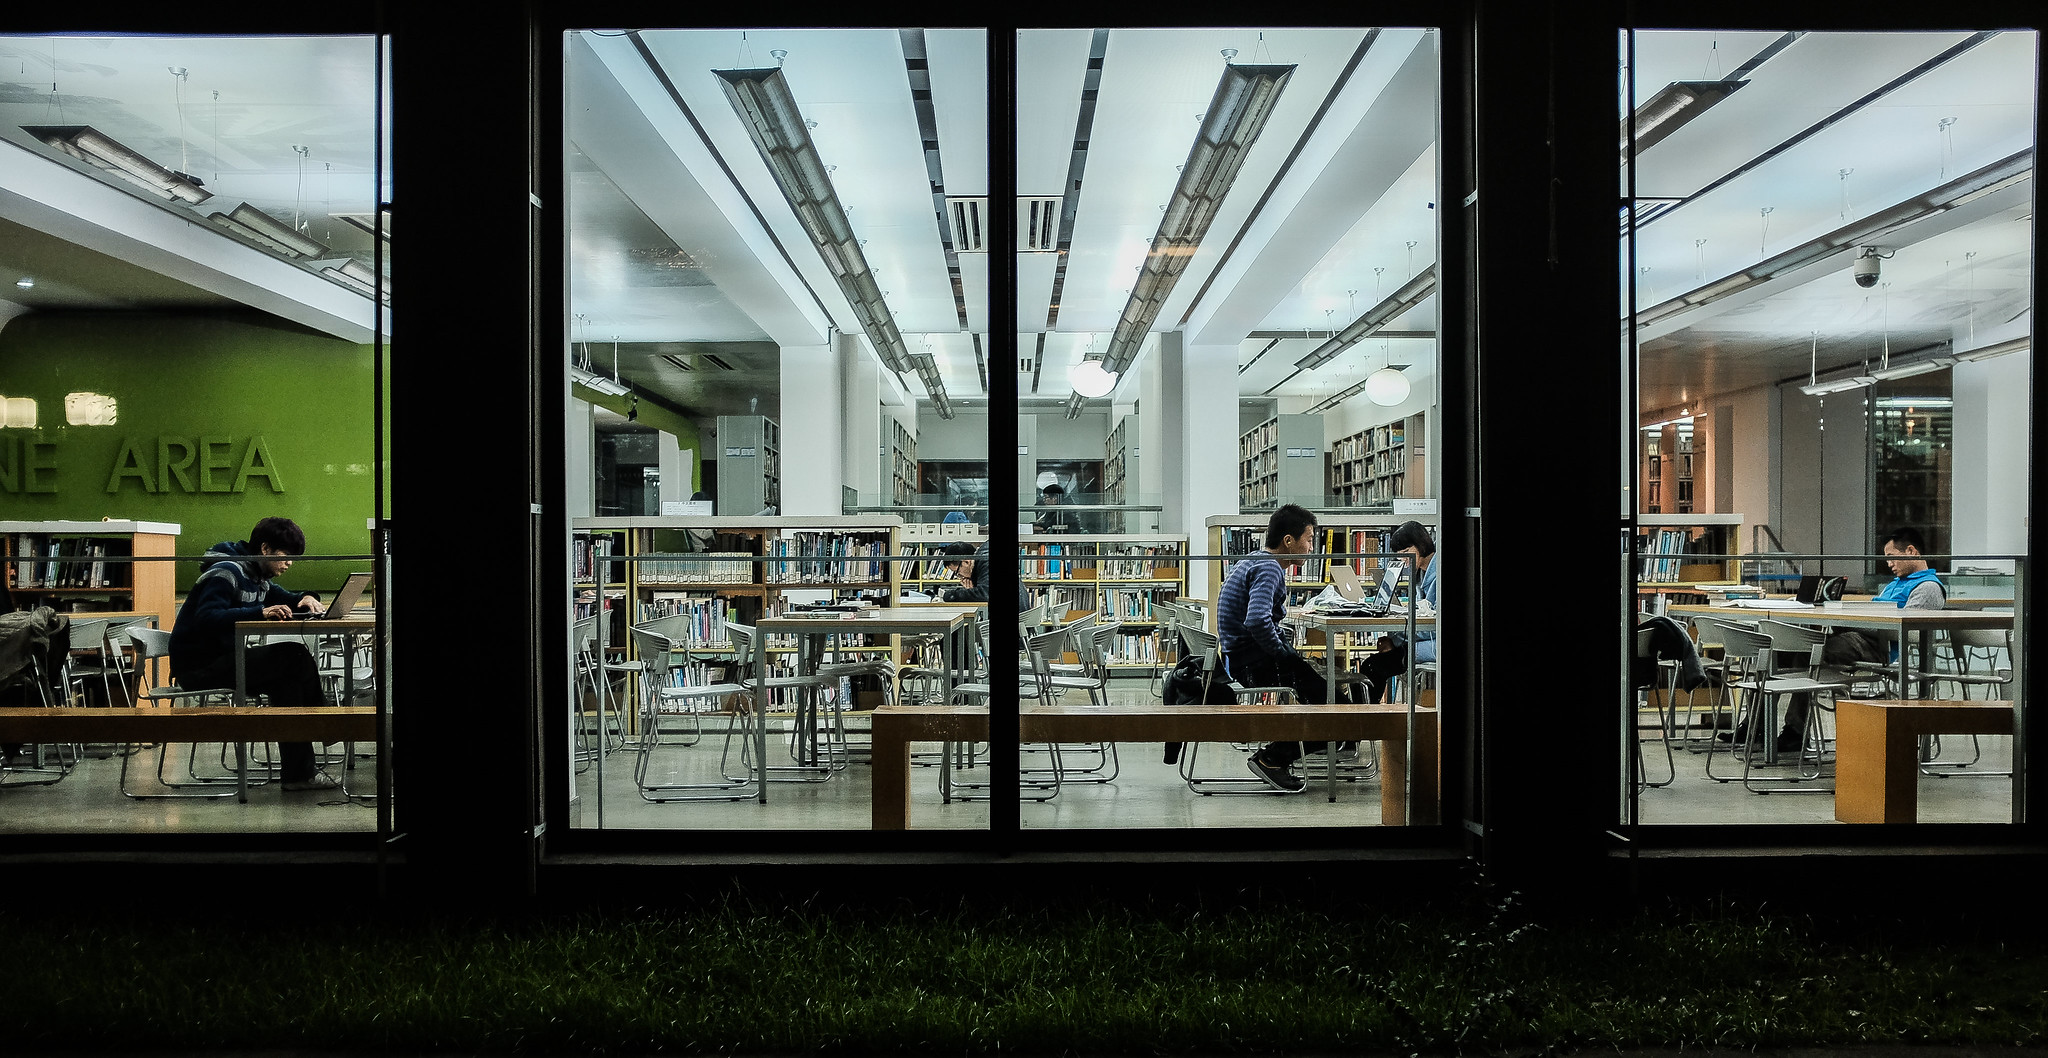 Students studying at large tables in a library late at night